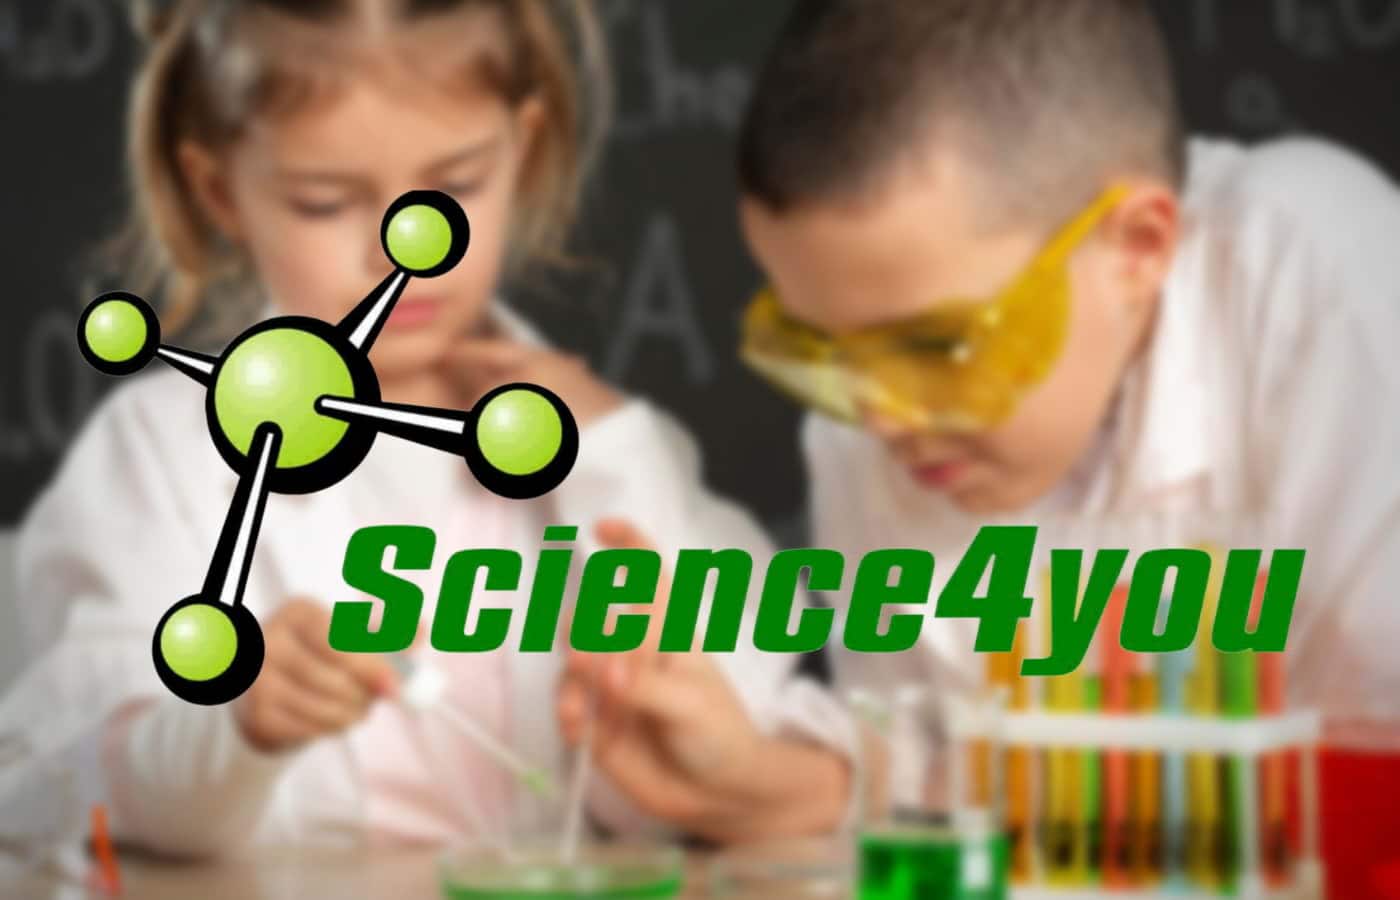 Science4You